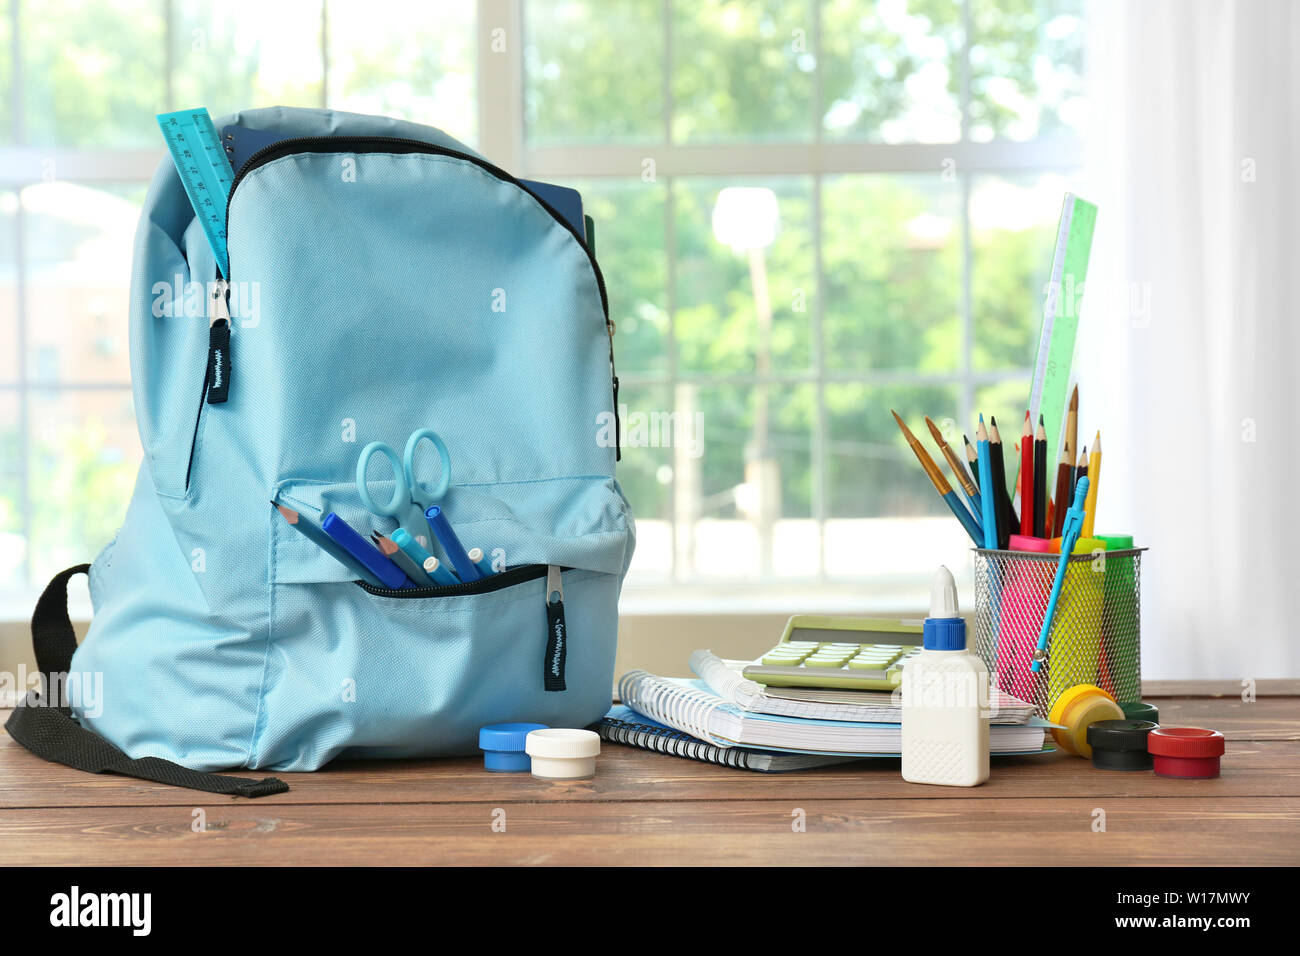 School backpack with stationery on table in room Stock Photo